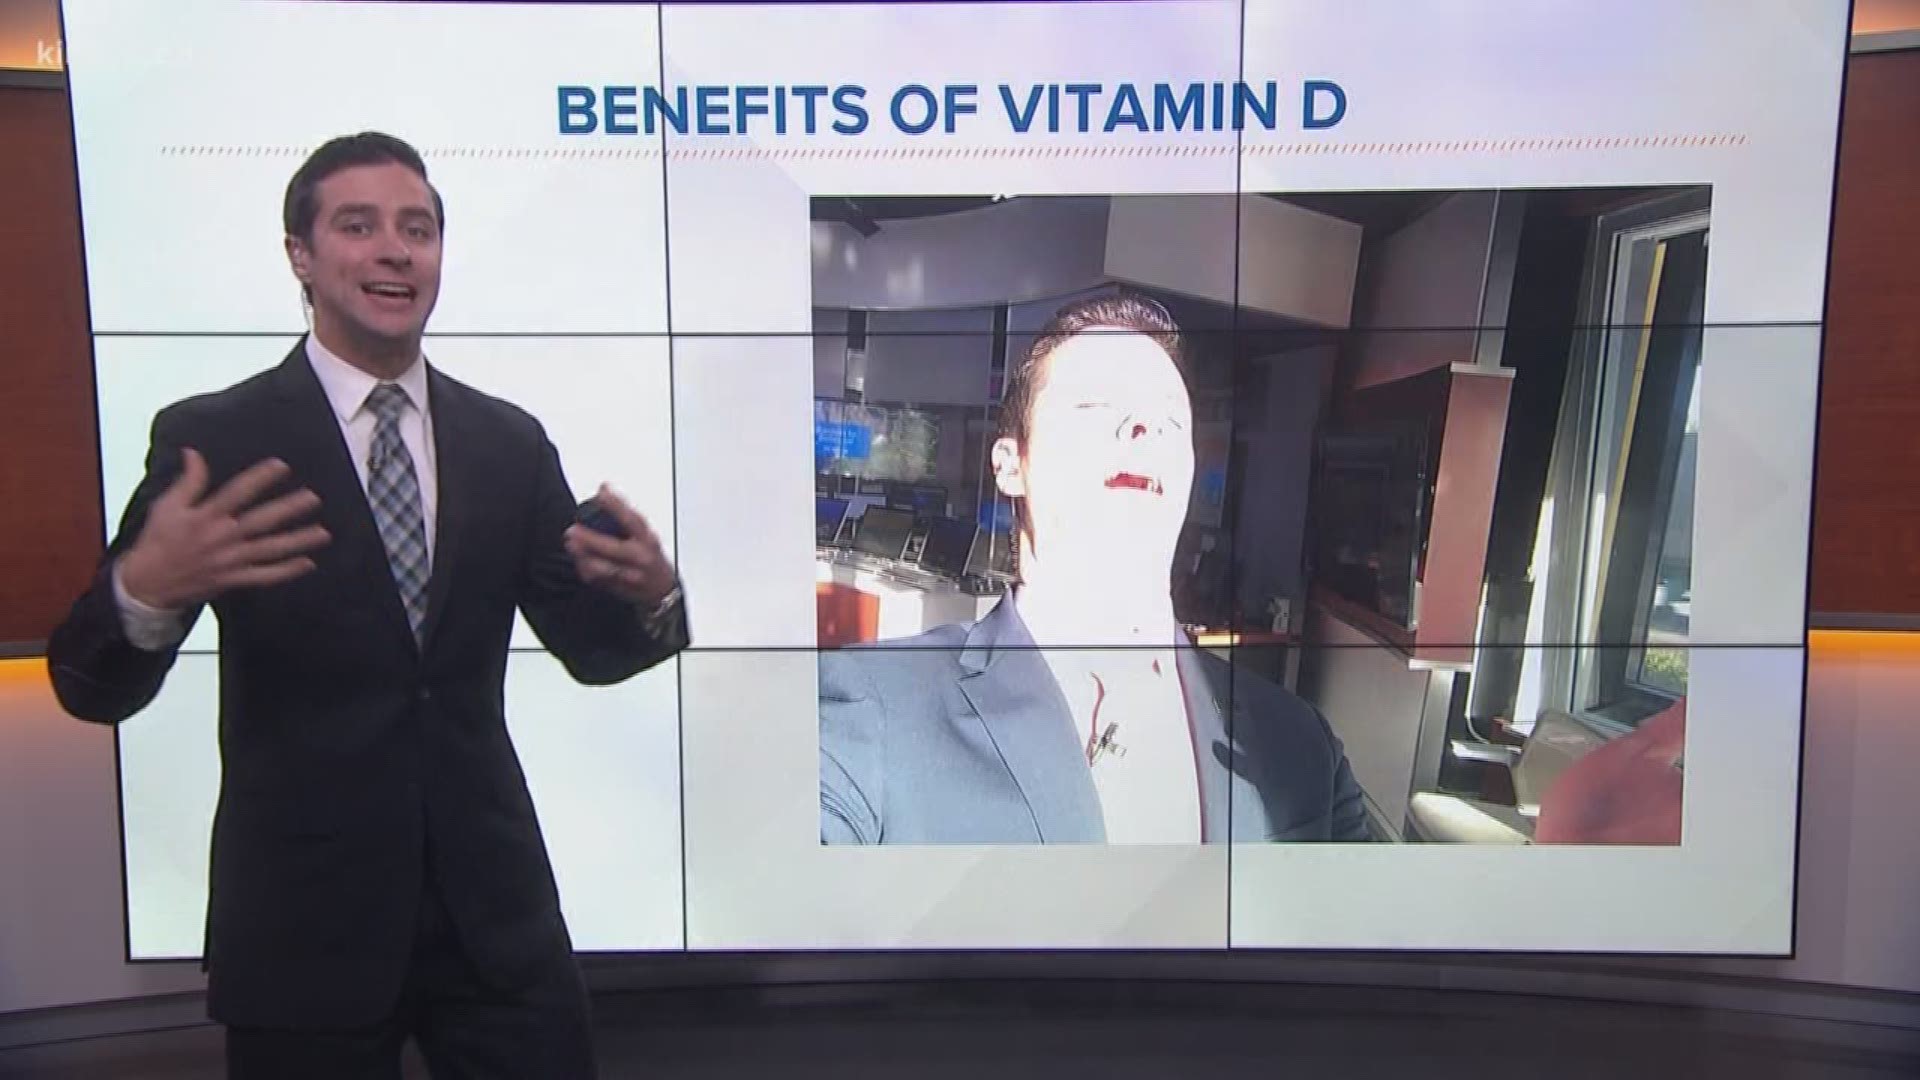 KING 5 Meteorologist Ben Dery discusses how much vitamin D we actually get in the winter and how it affects us.